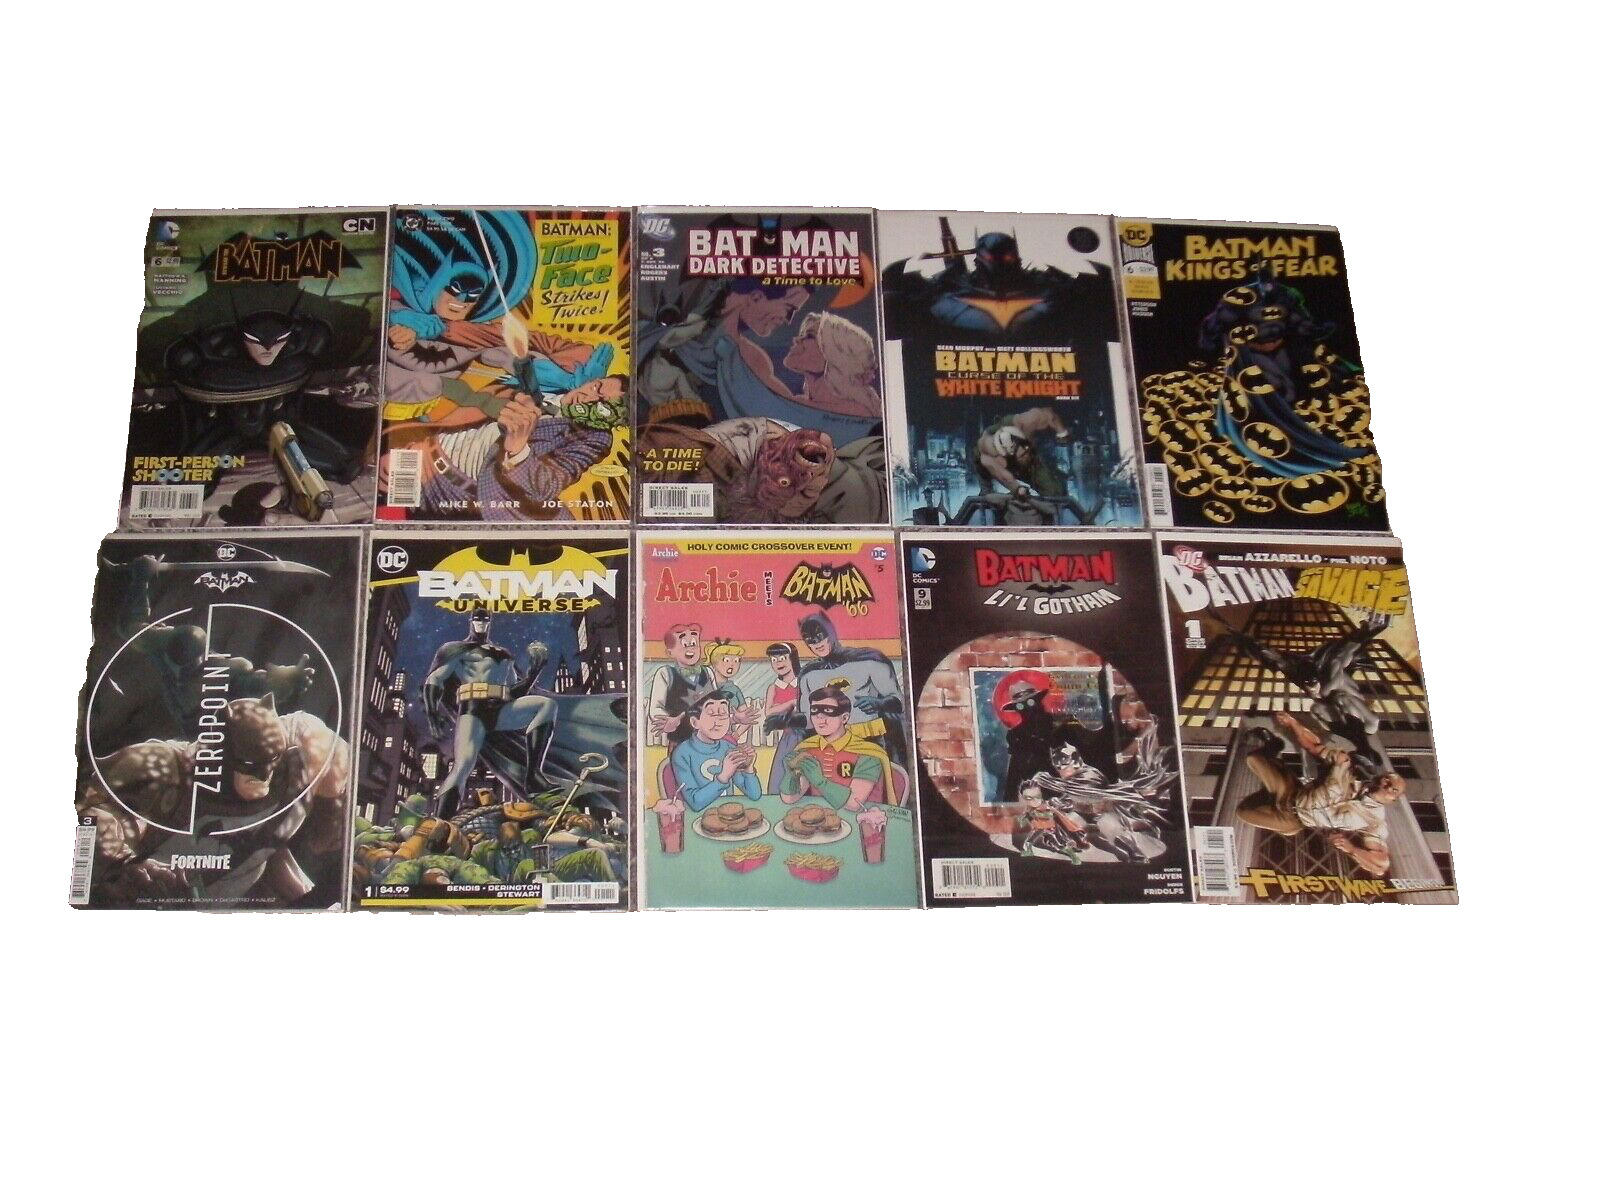 EPIC COMIC BOOK LOT OF 40 BATMAN TITLES CRAZY THERE ARE SO MANY. VF/NM 🦇